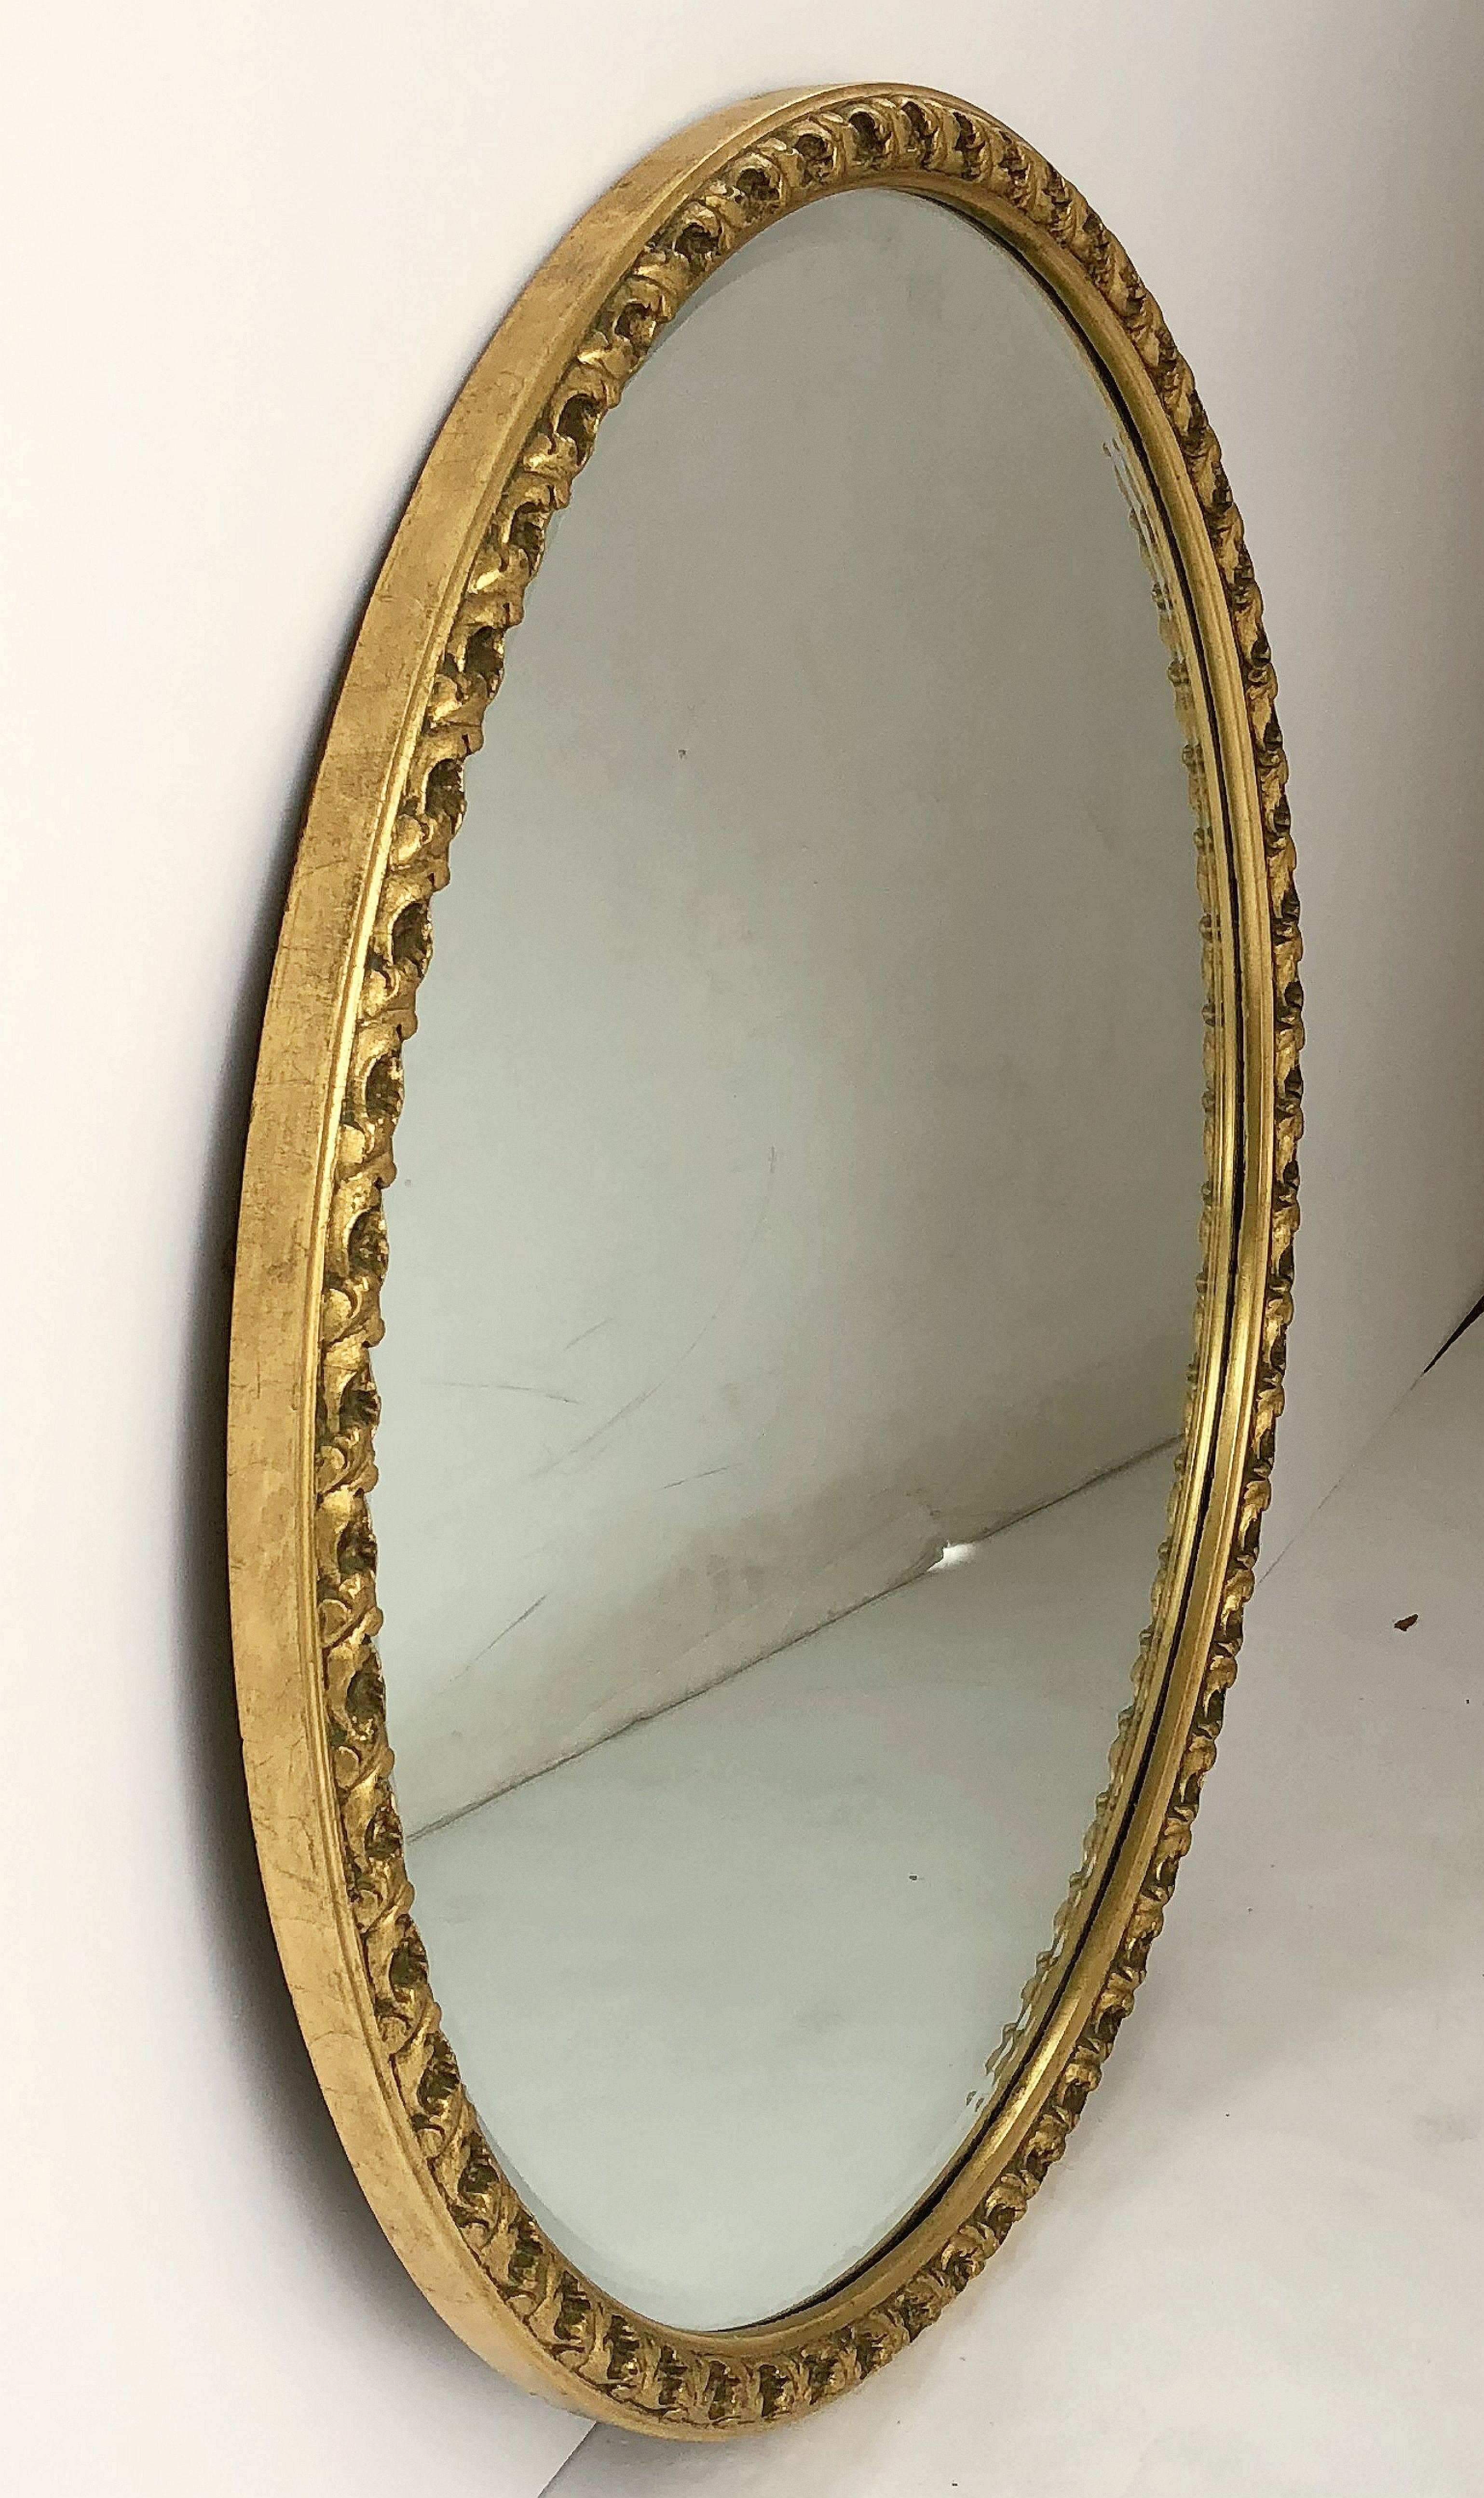 A fine English round bevelled mirror in a giltwood frame featuring a foliate design.

Measures: Diameter 25 1/2 inches.